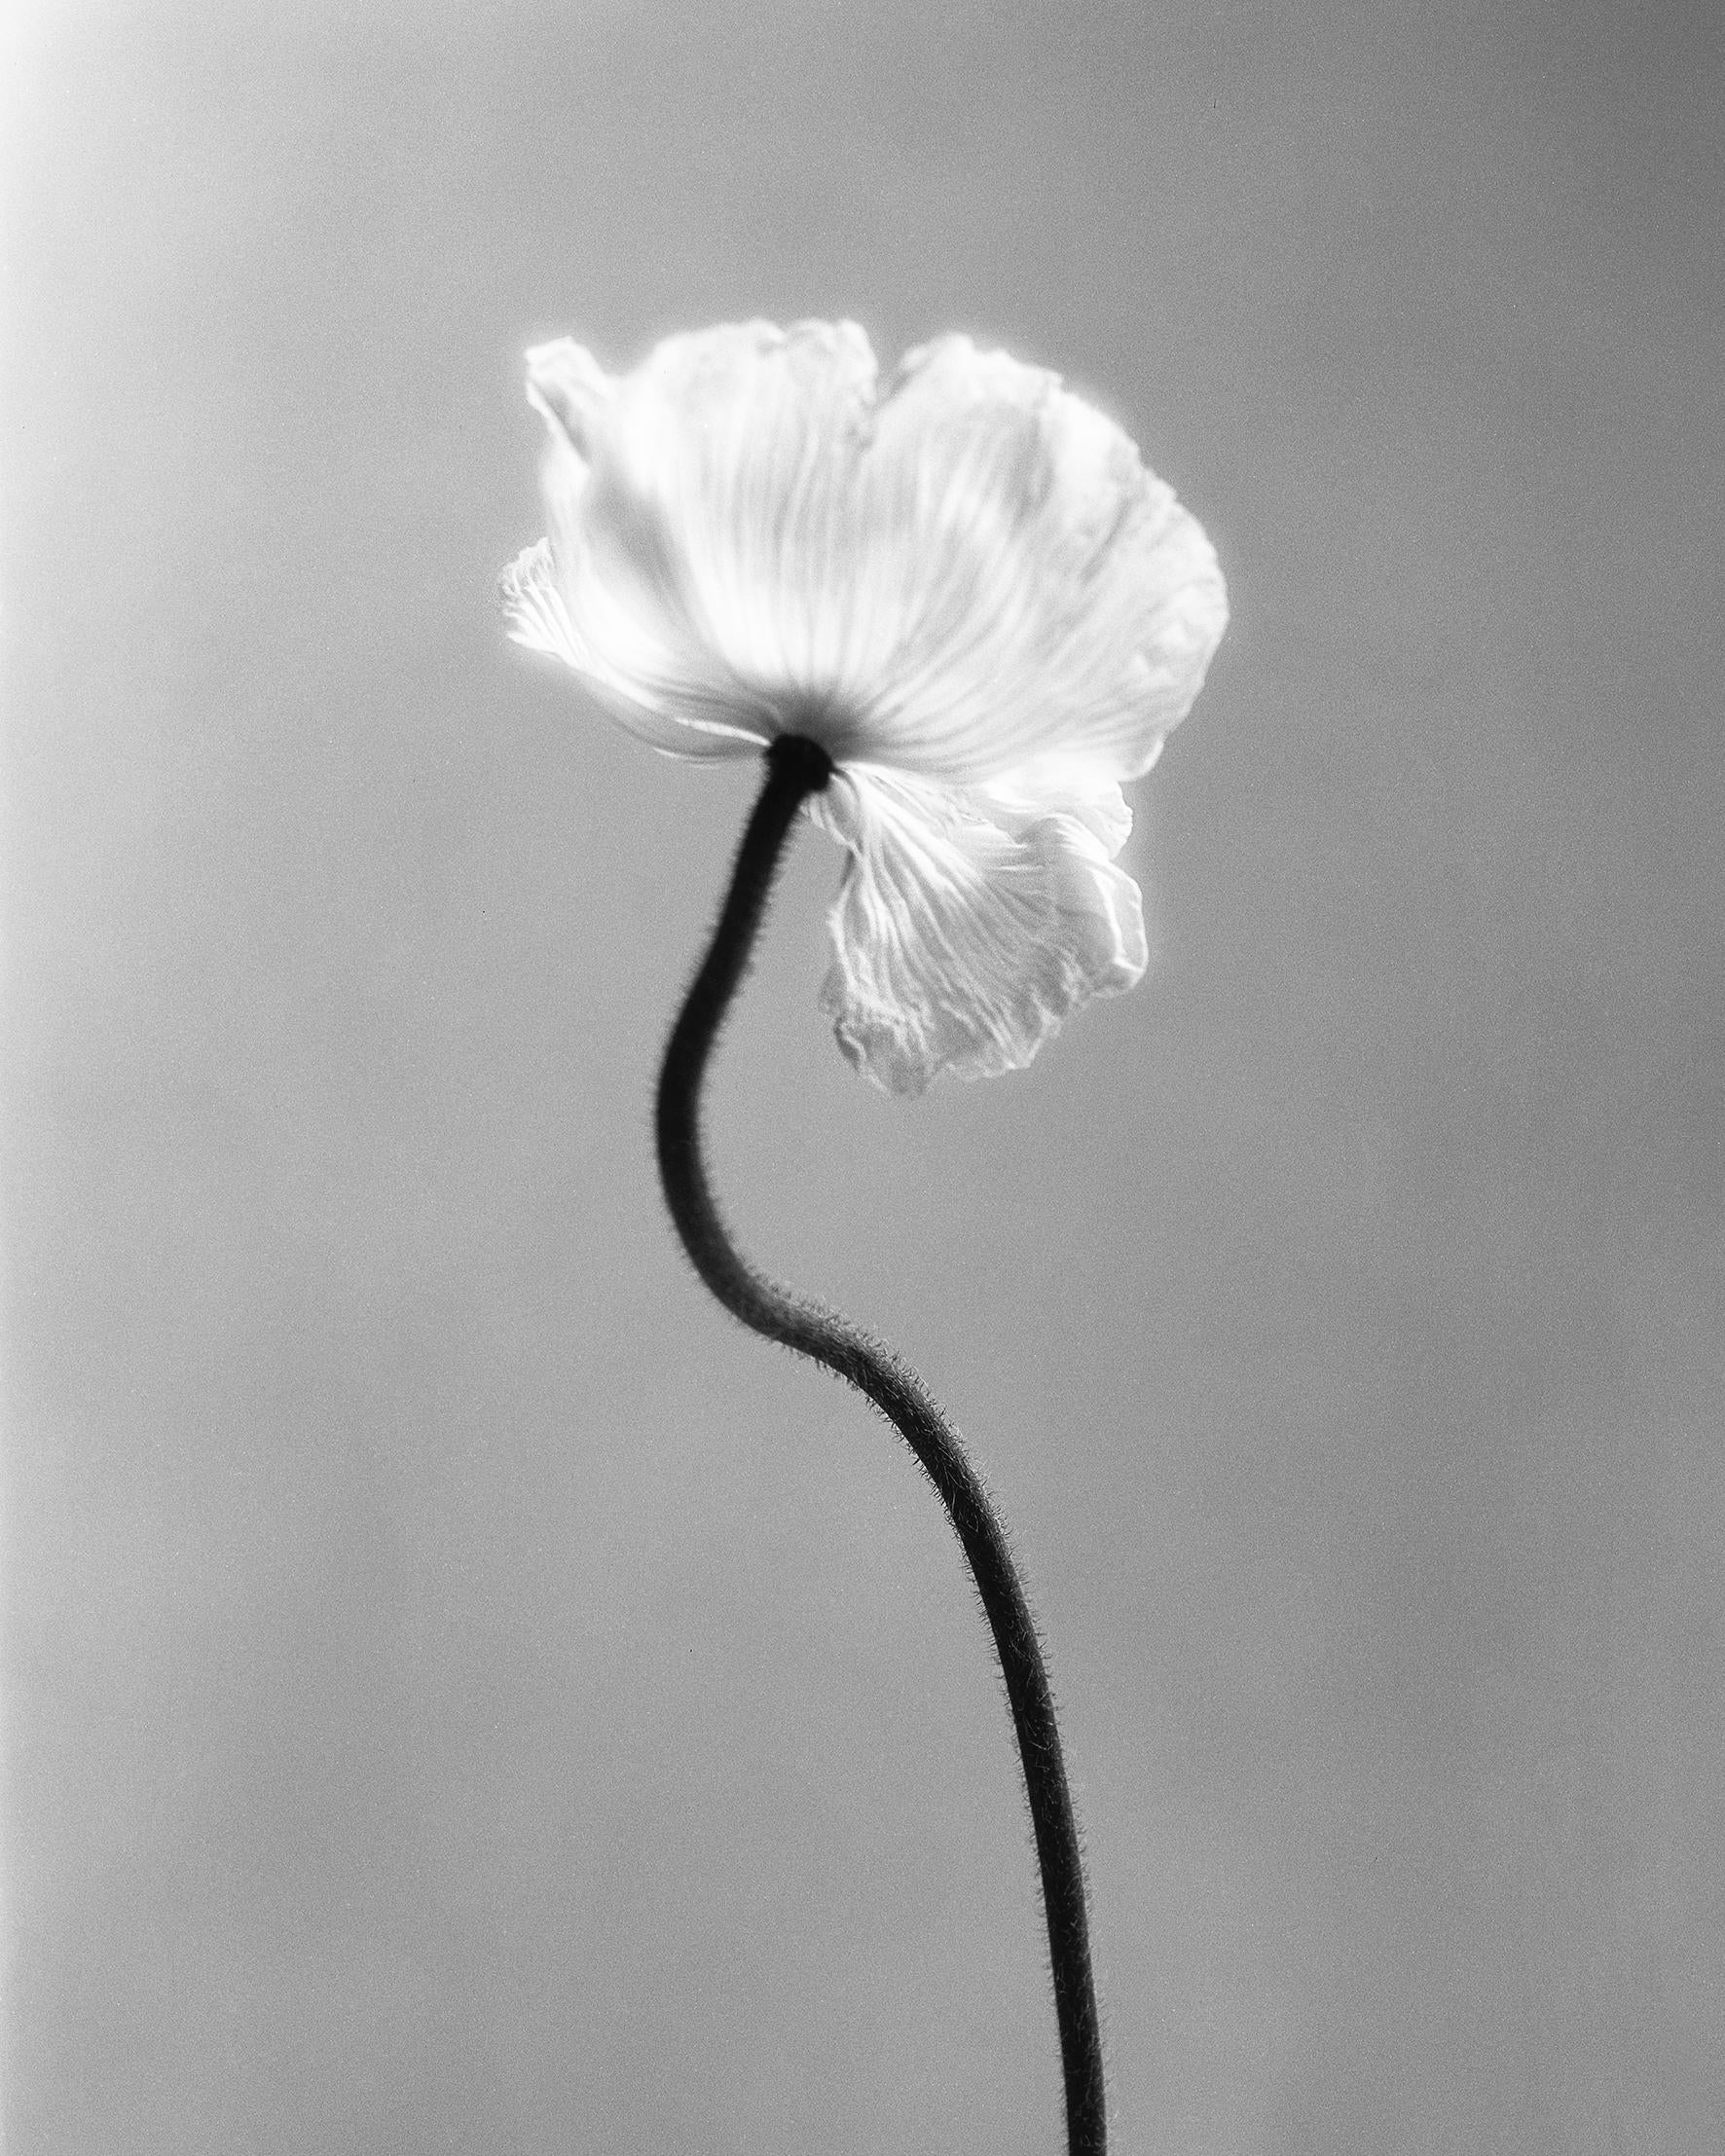 Ugne Pouwell Still-Life Photograph - Poppy No.3 - Analogue black and white floral photography, Limited edition of 20.